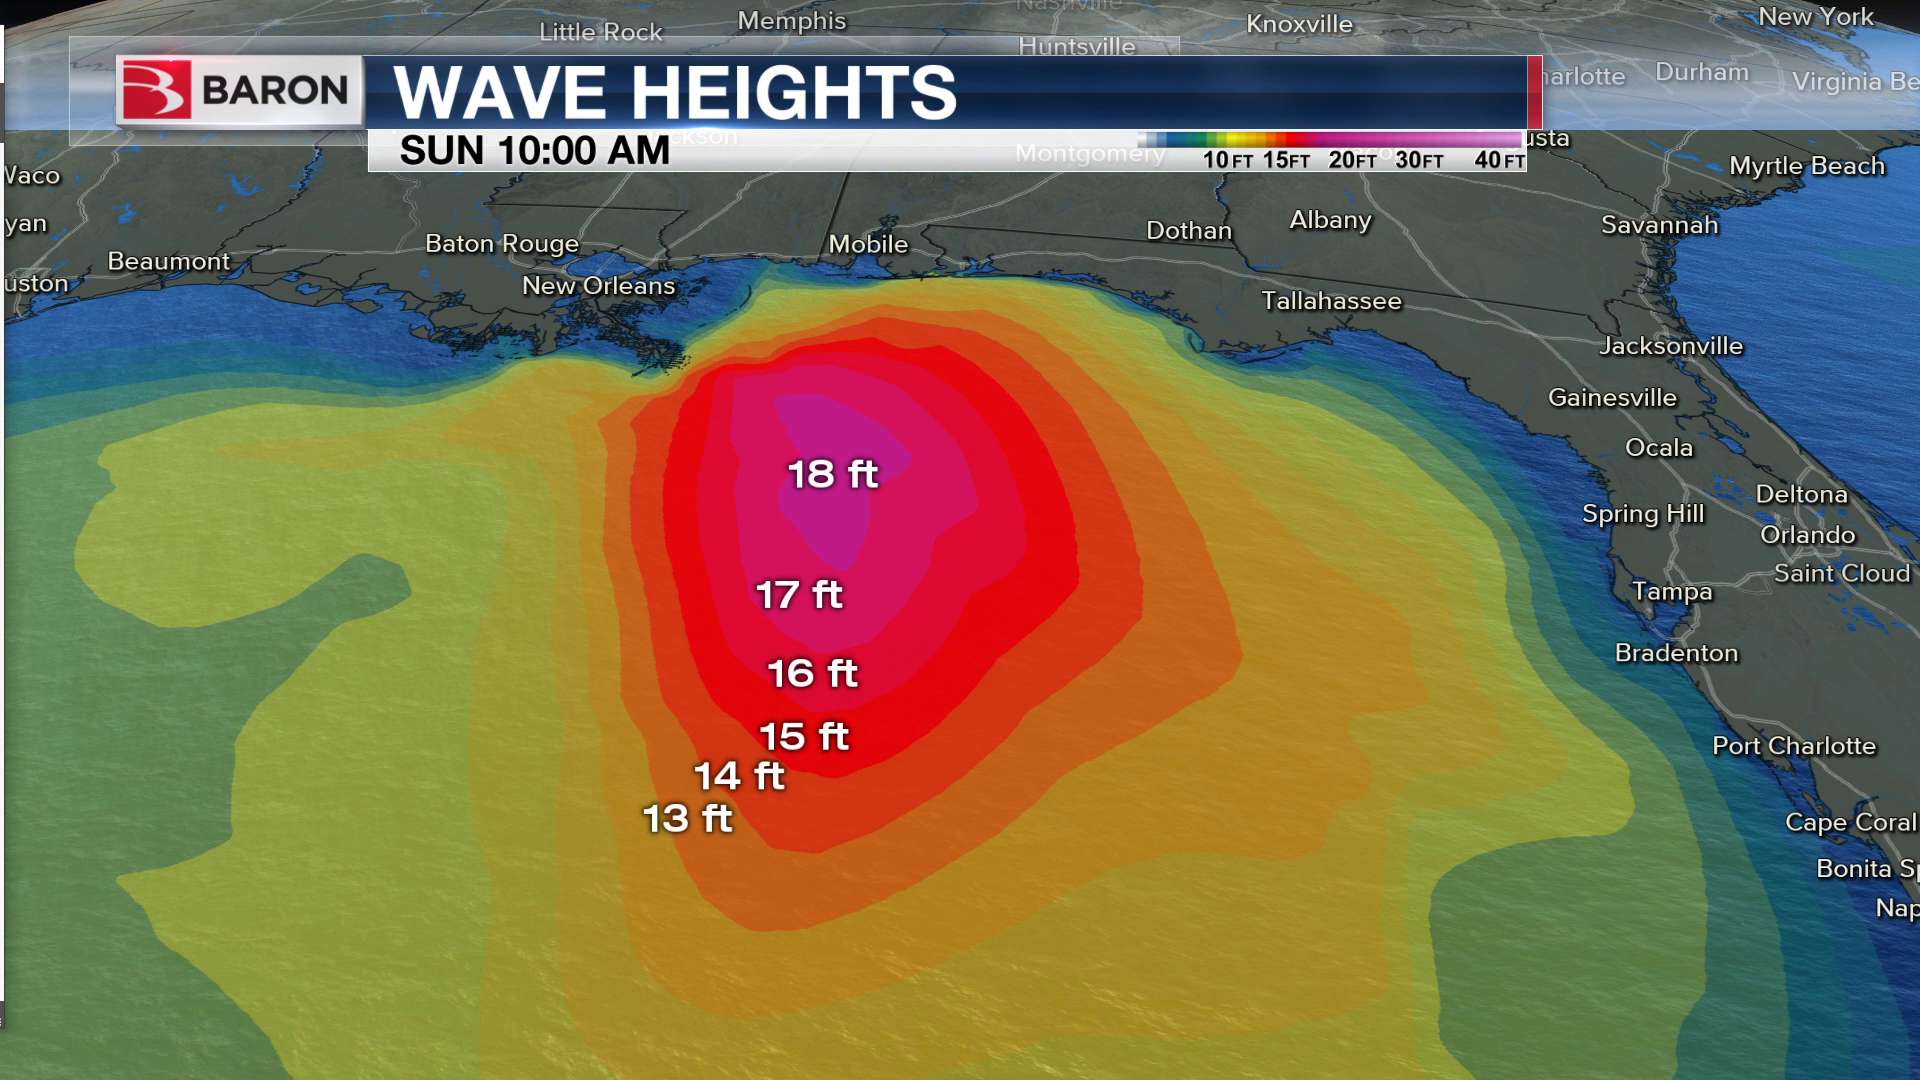 WAVE-HEIGHTS